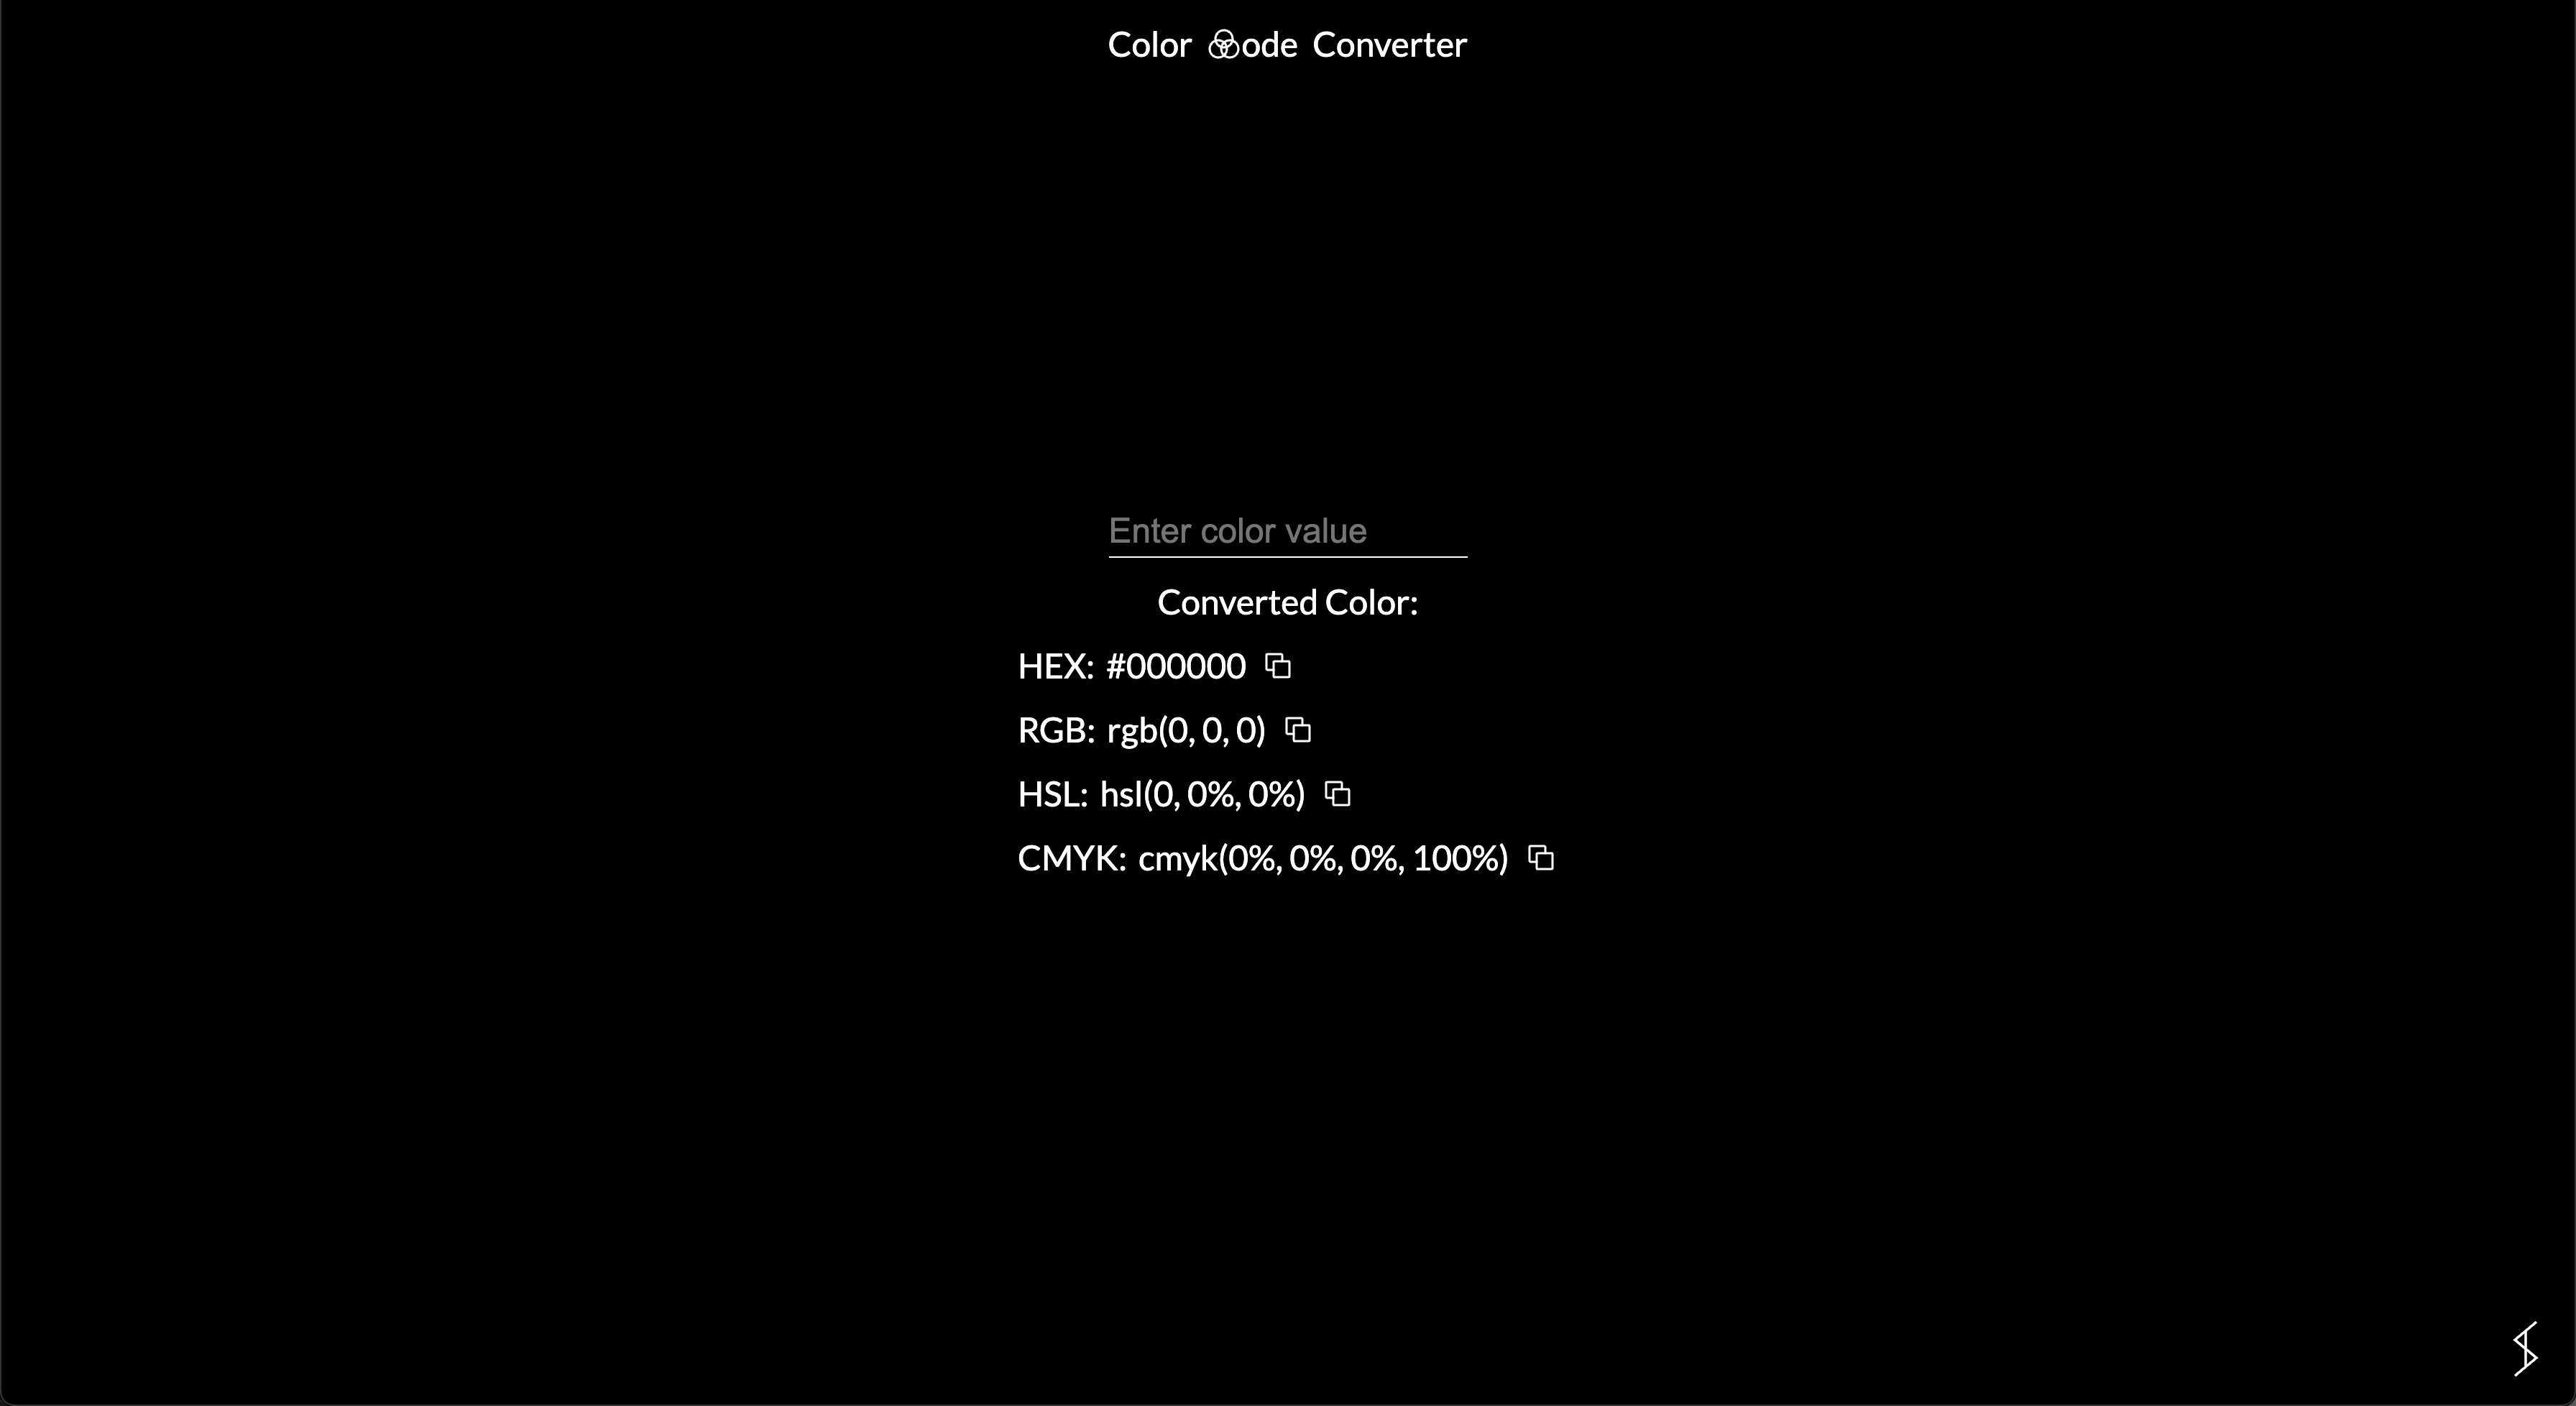 A photo of my color code converter website